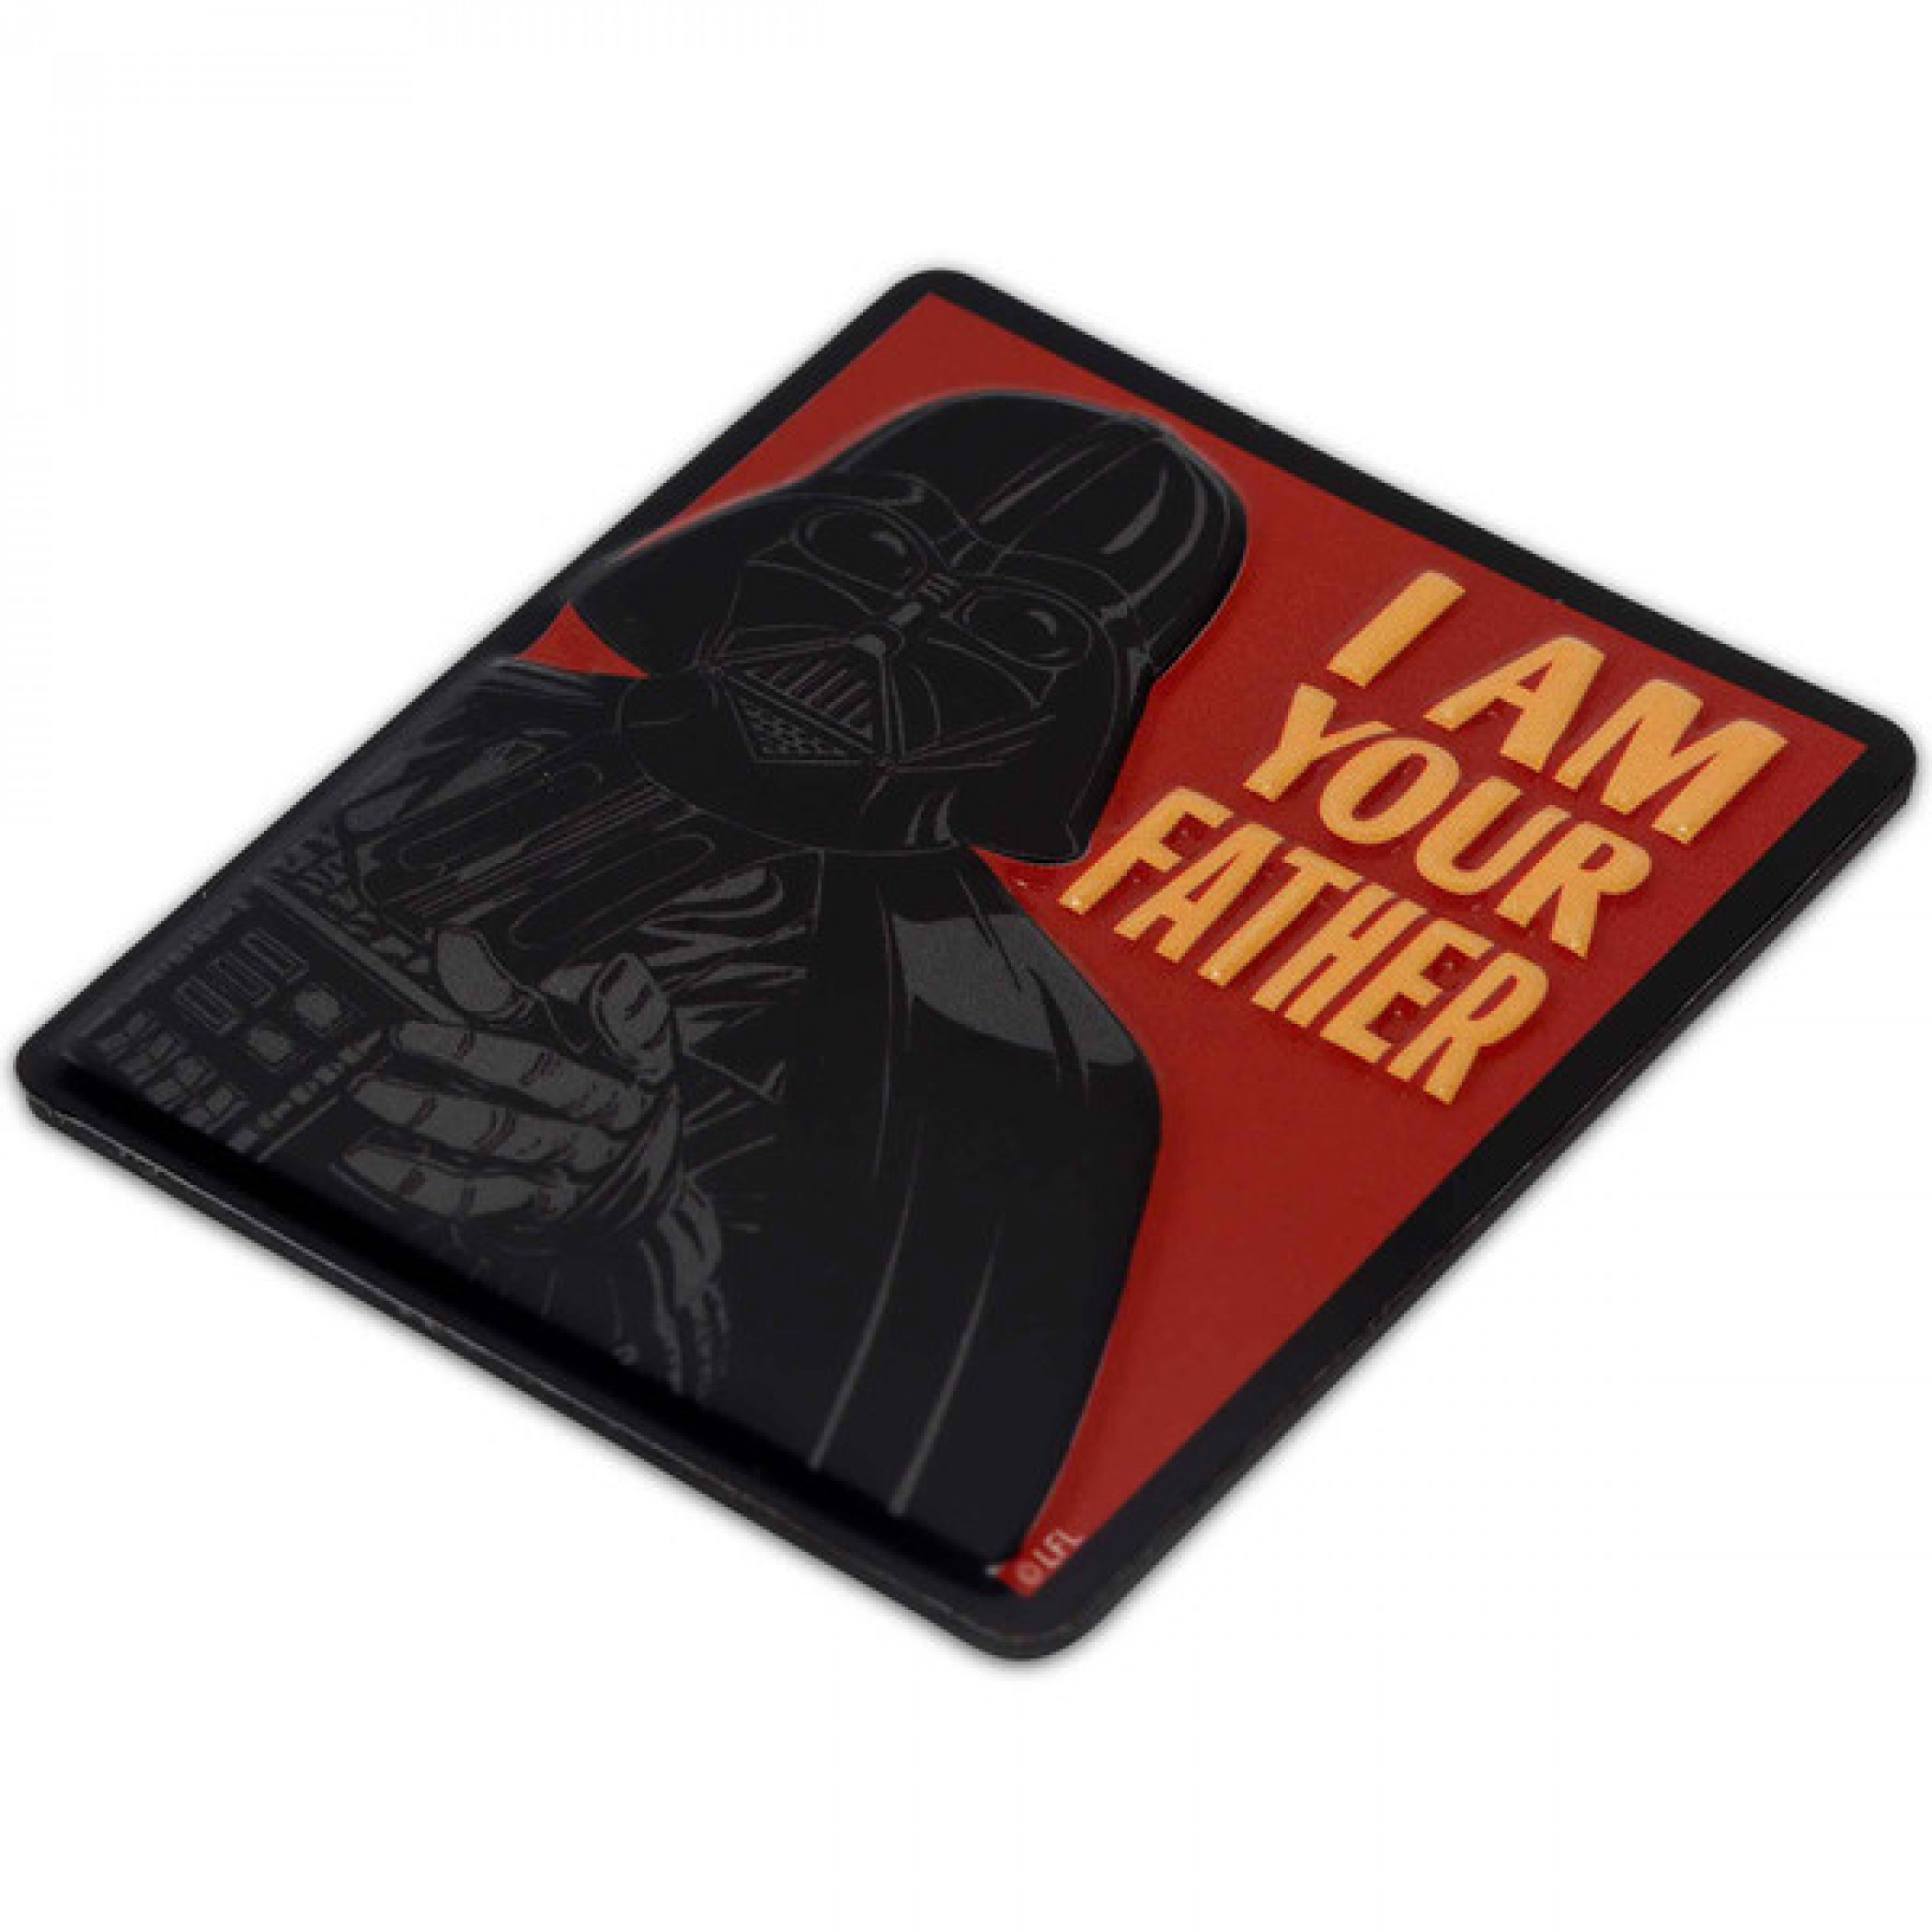 Star Wars Darth Vader I Am Your Father Embossed Tin Magnet